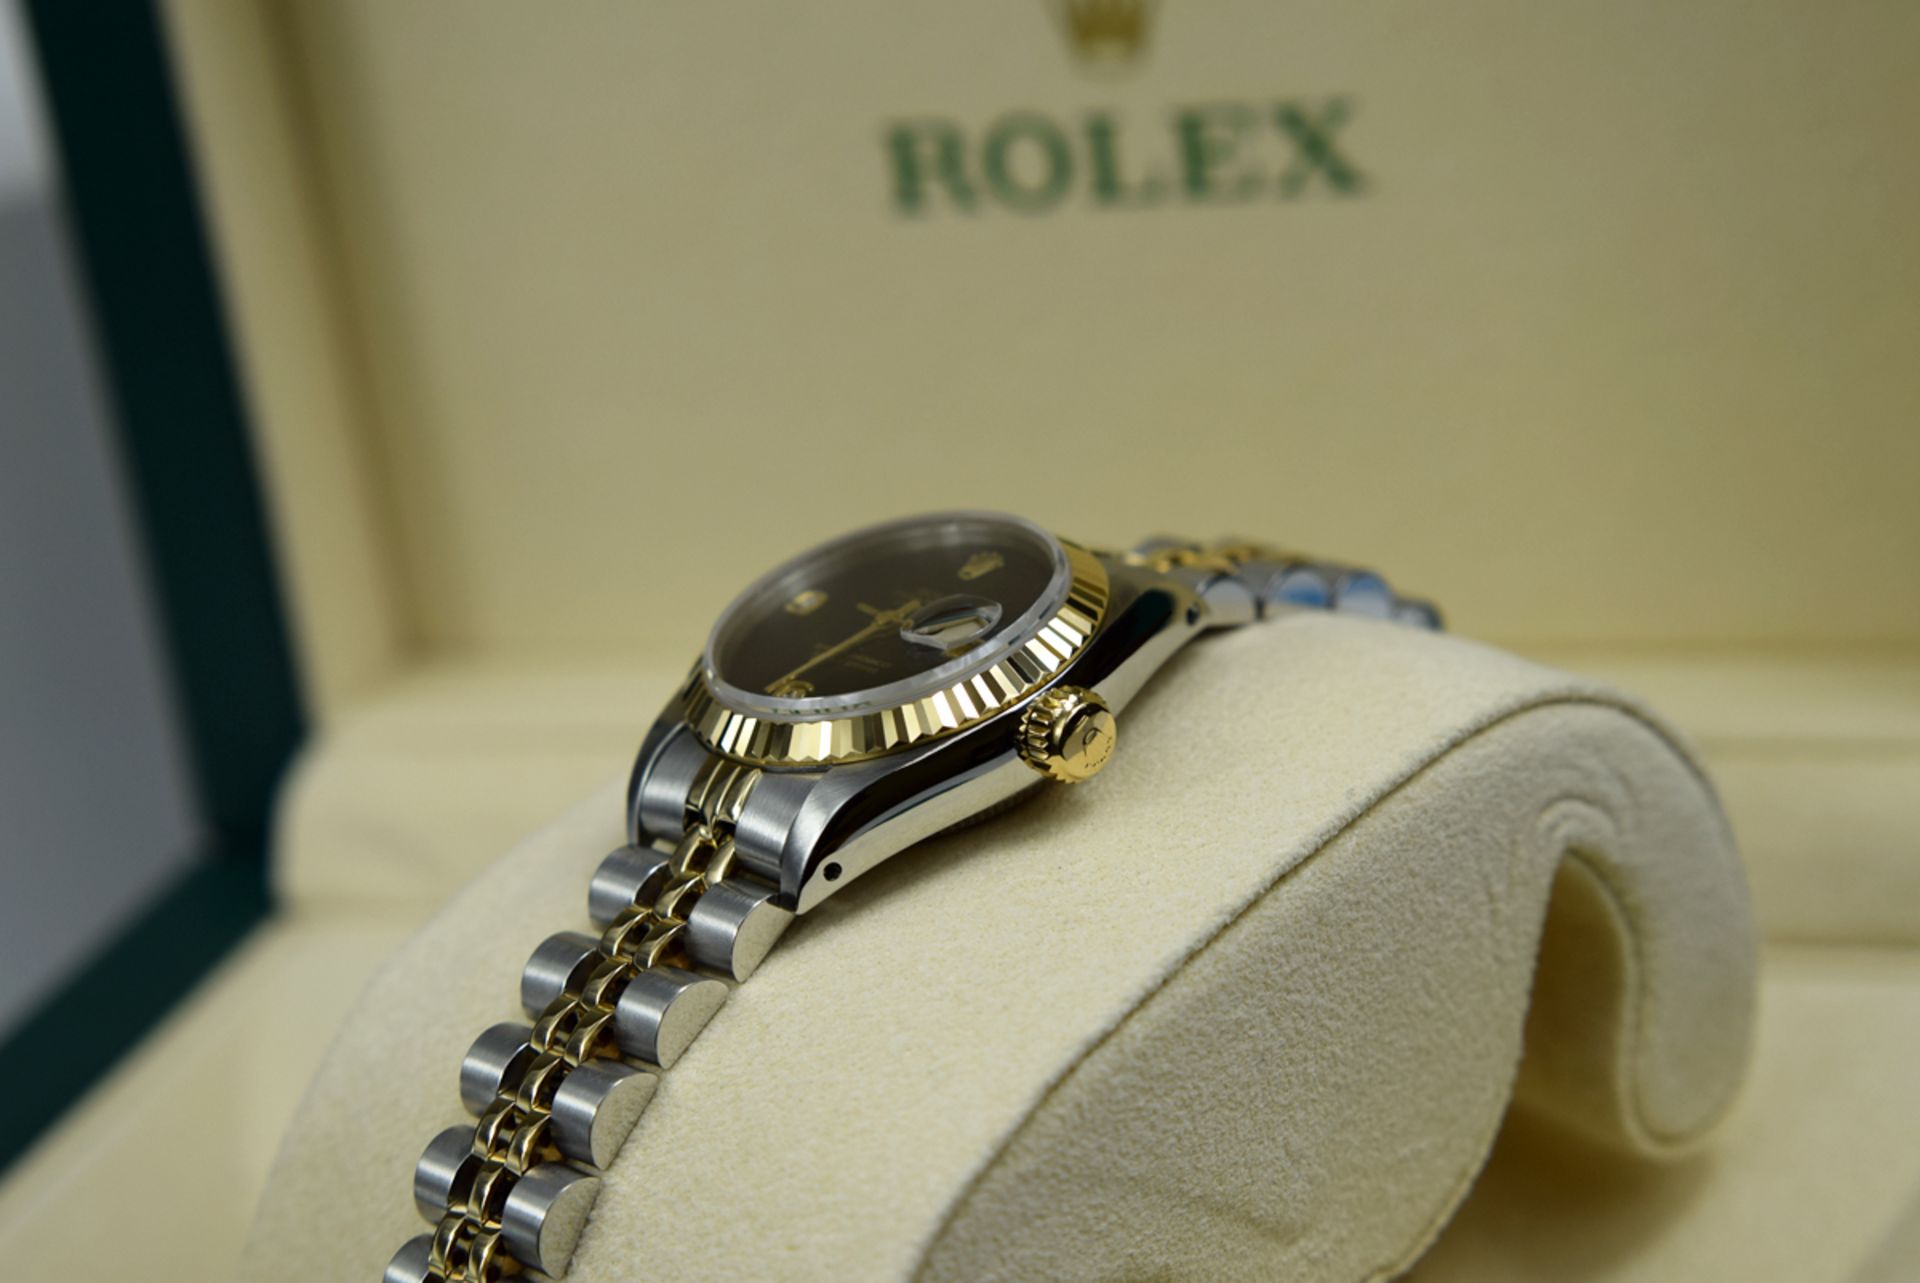 ROLEX Datejust (Ladies) in Steel and 18k Gold w/ *RARE Diamond Dial - Image 8 of 10